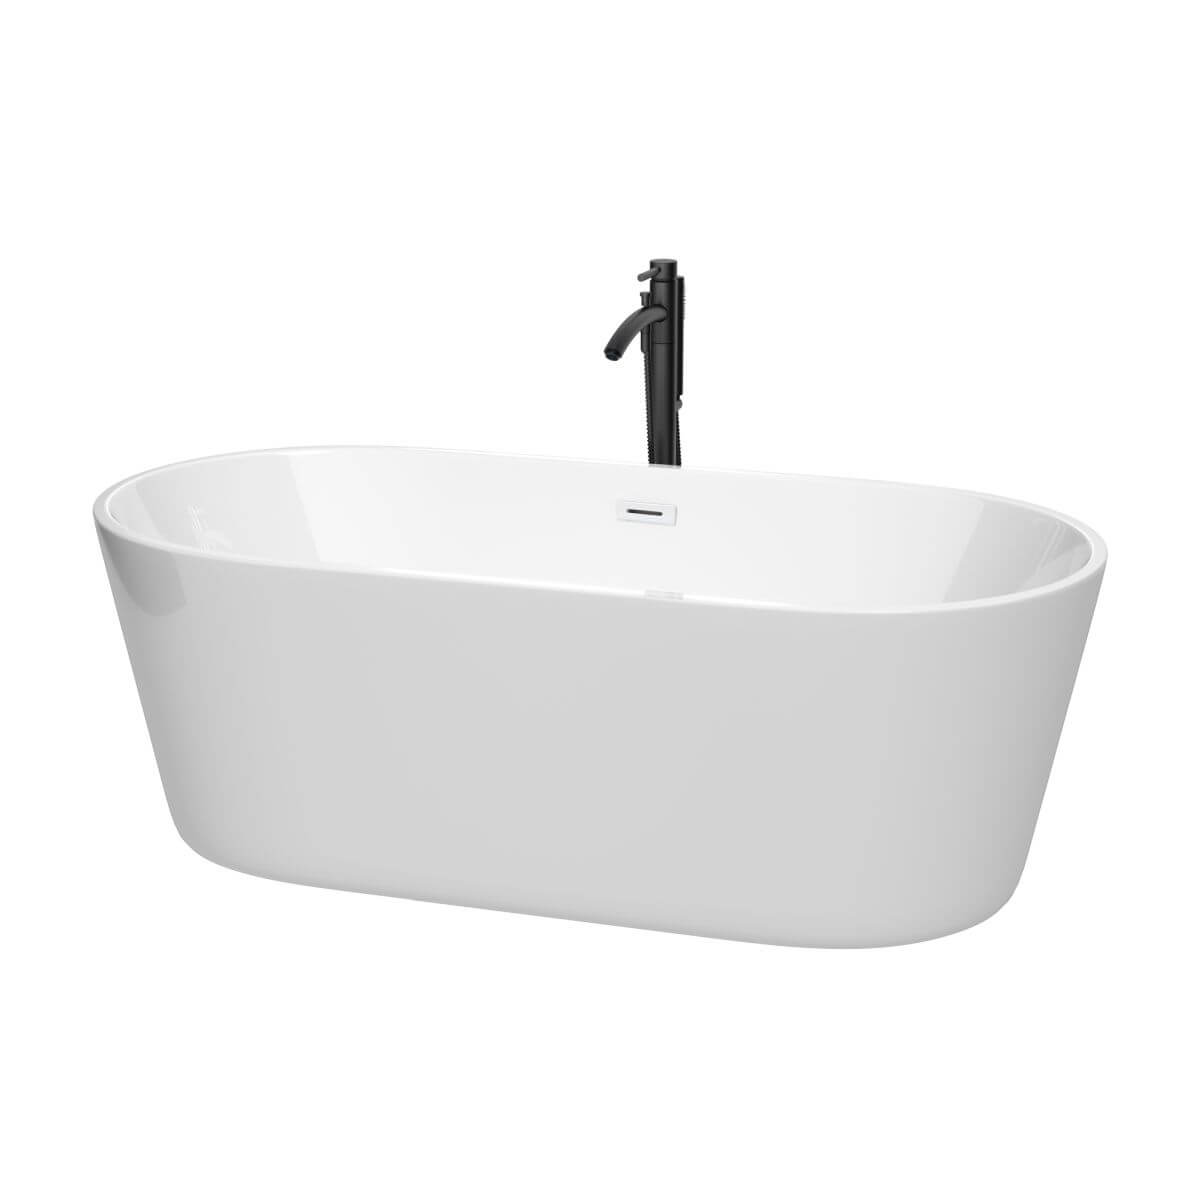 Wyndham Collection Carissa 67 inch Freestanding Bathtub in White with Shiny White Trim and Floor Mounted Faucet in Matte Black - WCOBT101267SWATPBK